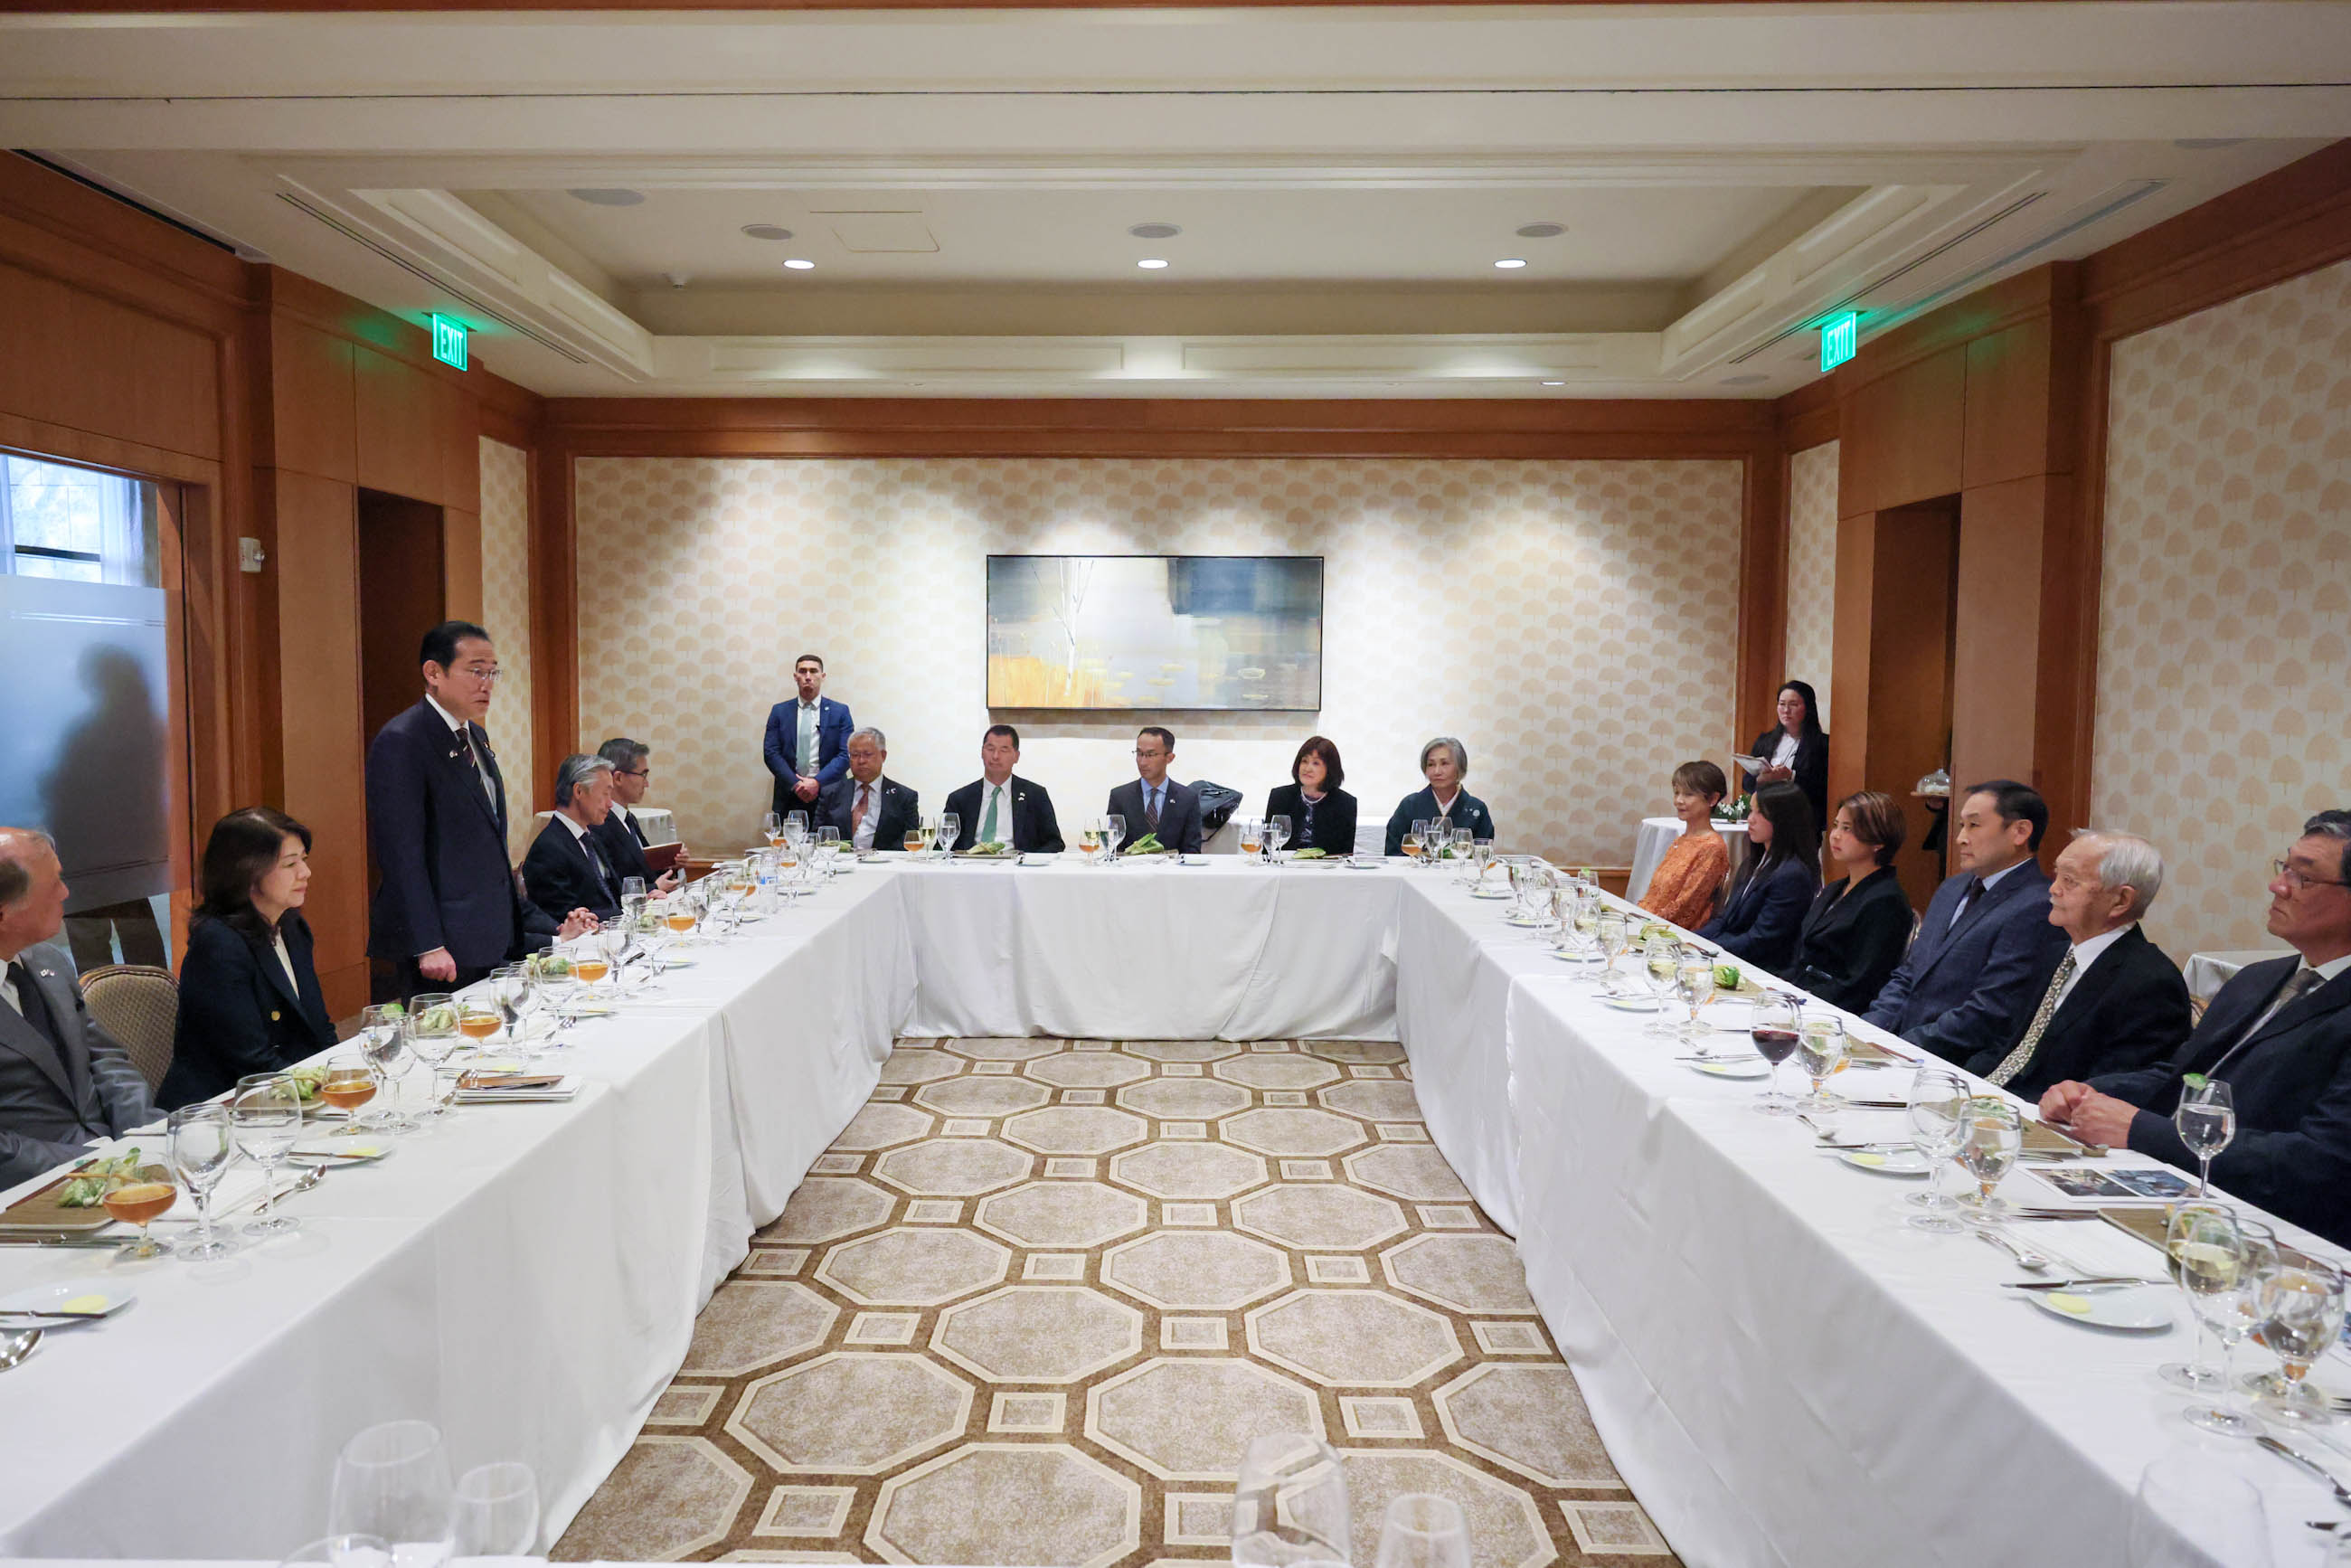 Dinner with individuals who have ties with Japan residing in the State of North Carolina (2)